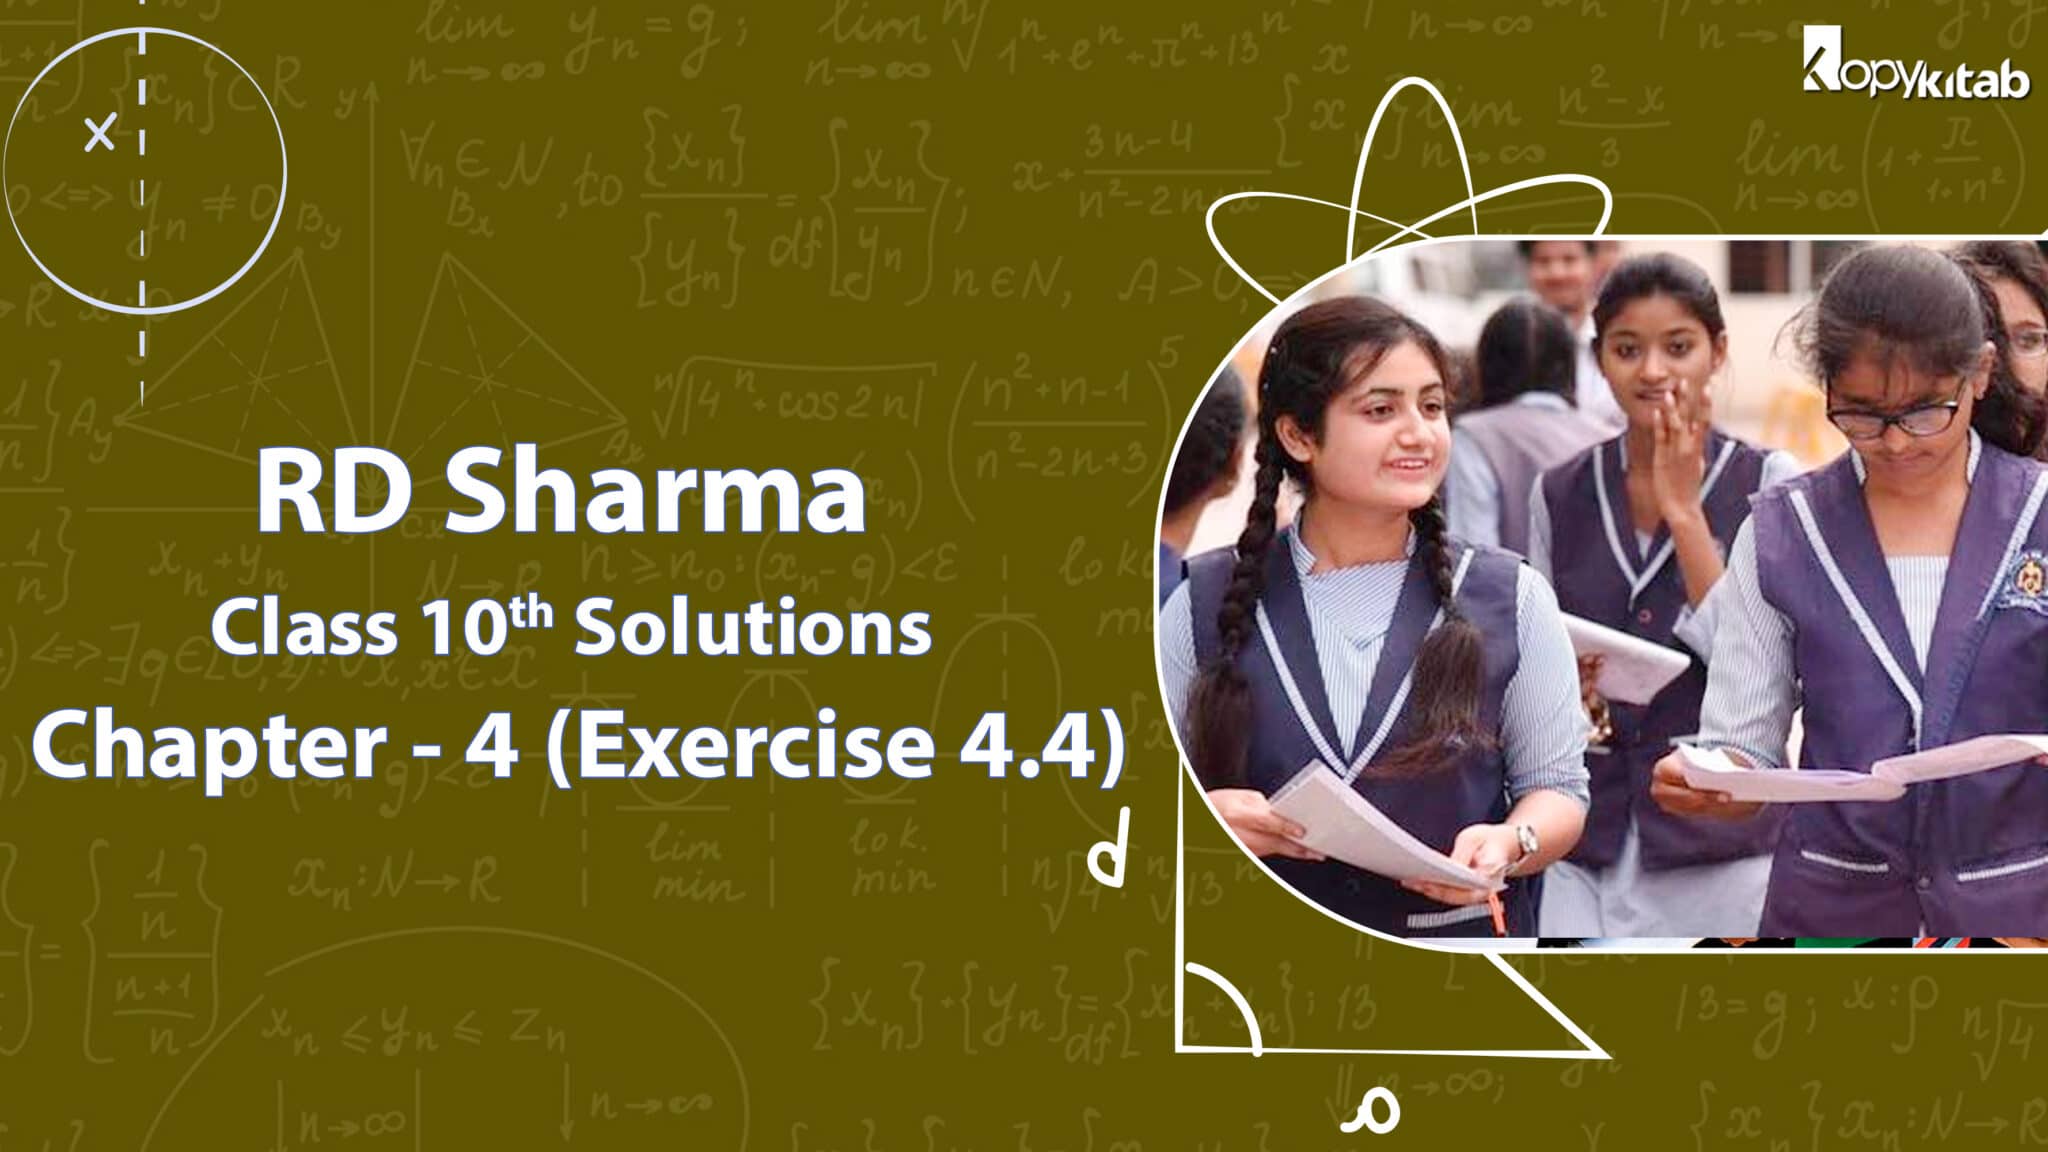 RD Sharma Class 10 Solutions Chapter 4 Exercise 4.4